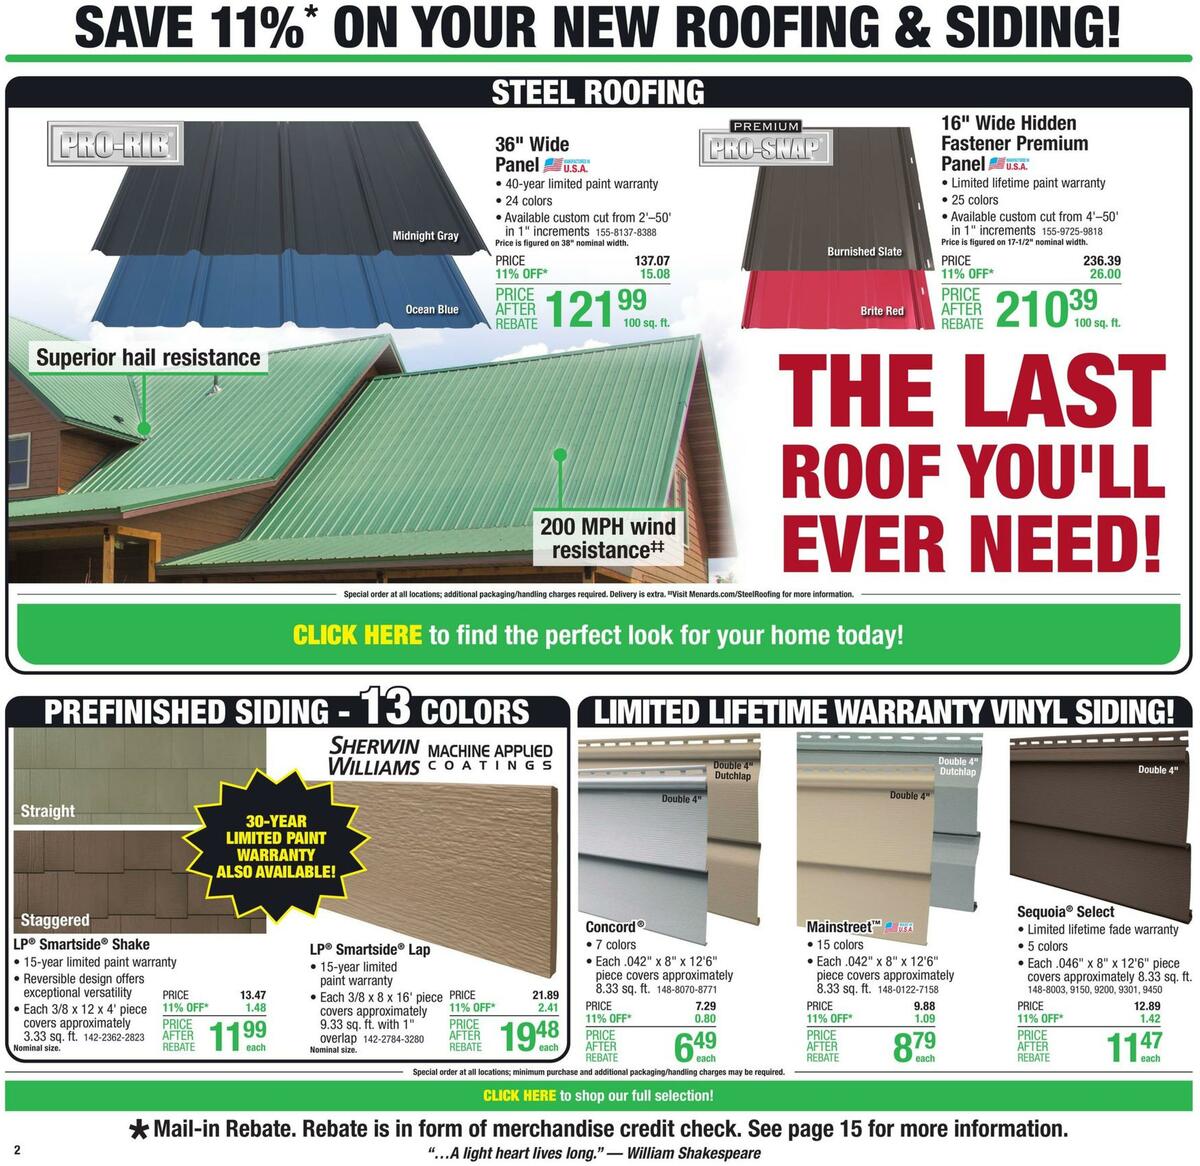 Menards Weekly Ad from August 11